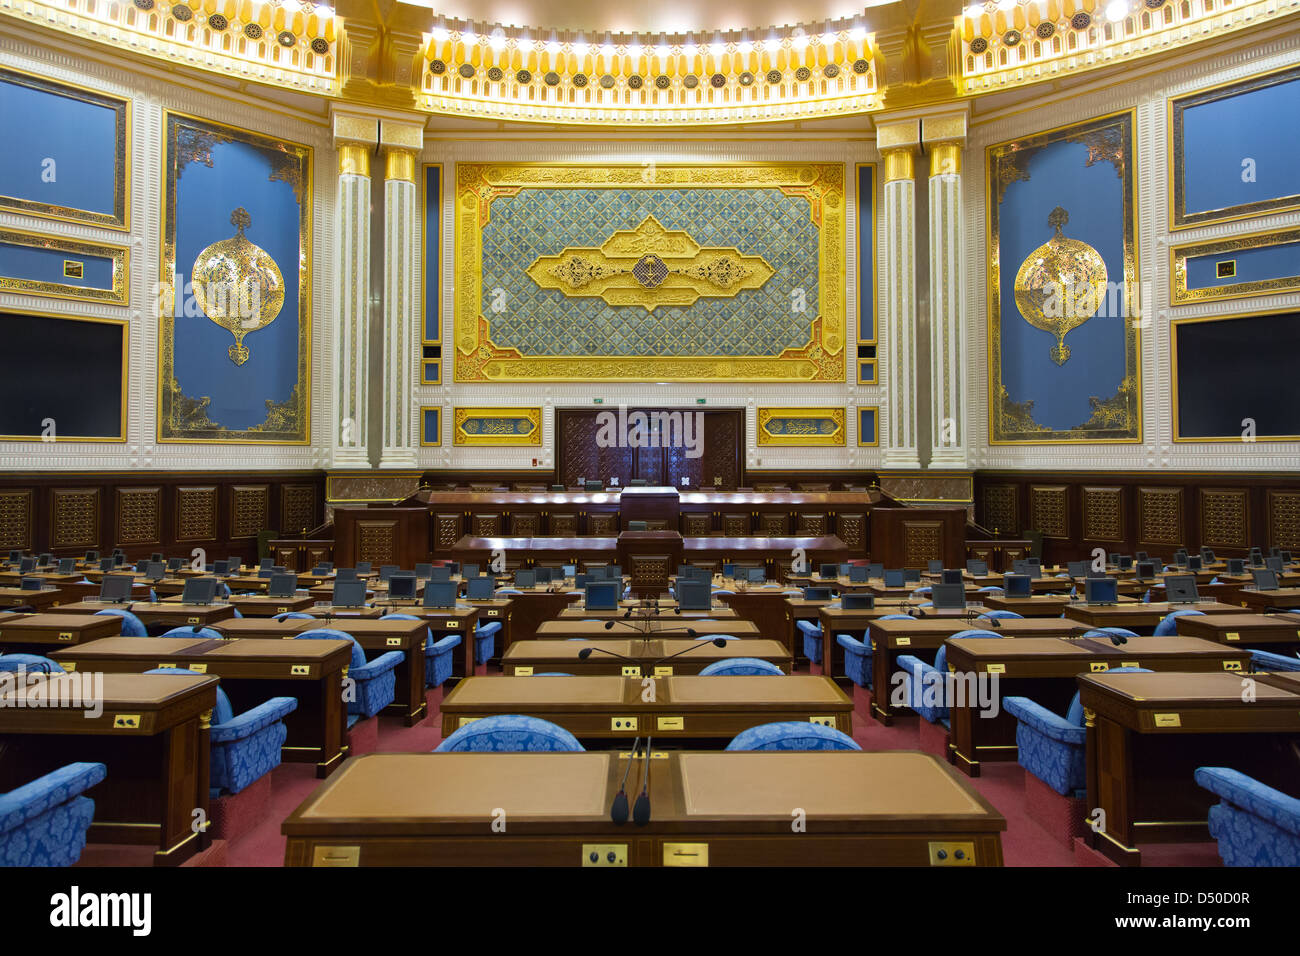 The ceremonial Parliament chamber in Rhiyhd, Saudi Arabia used by the Consultative Assembly of Saudi Arabia Stock Photo